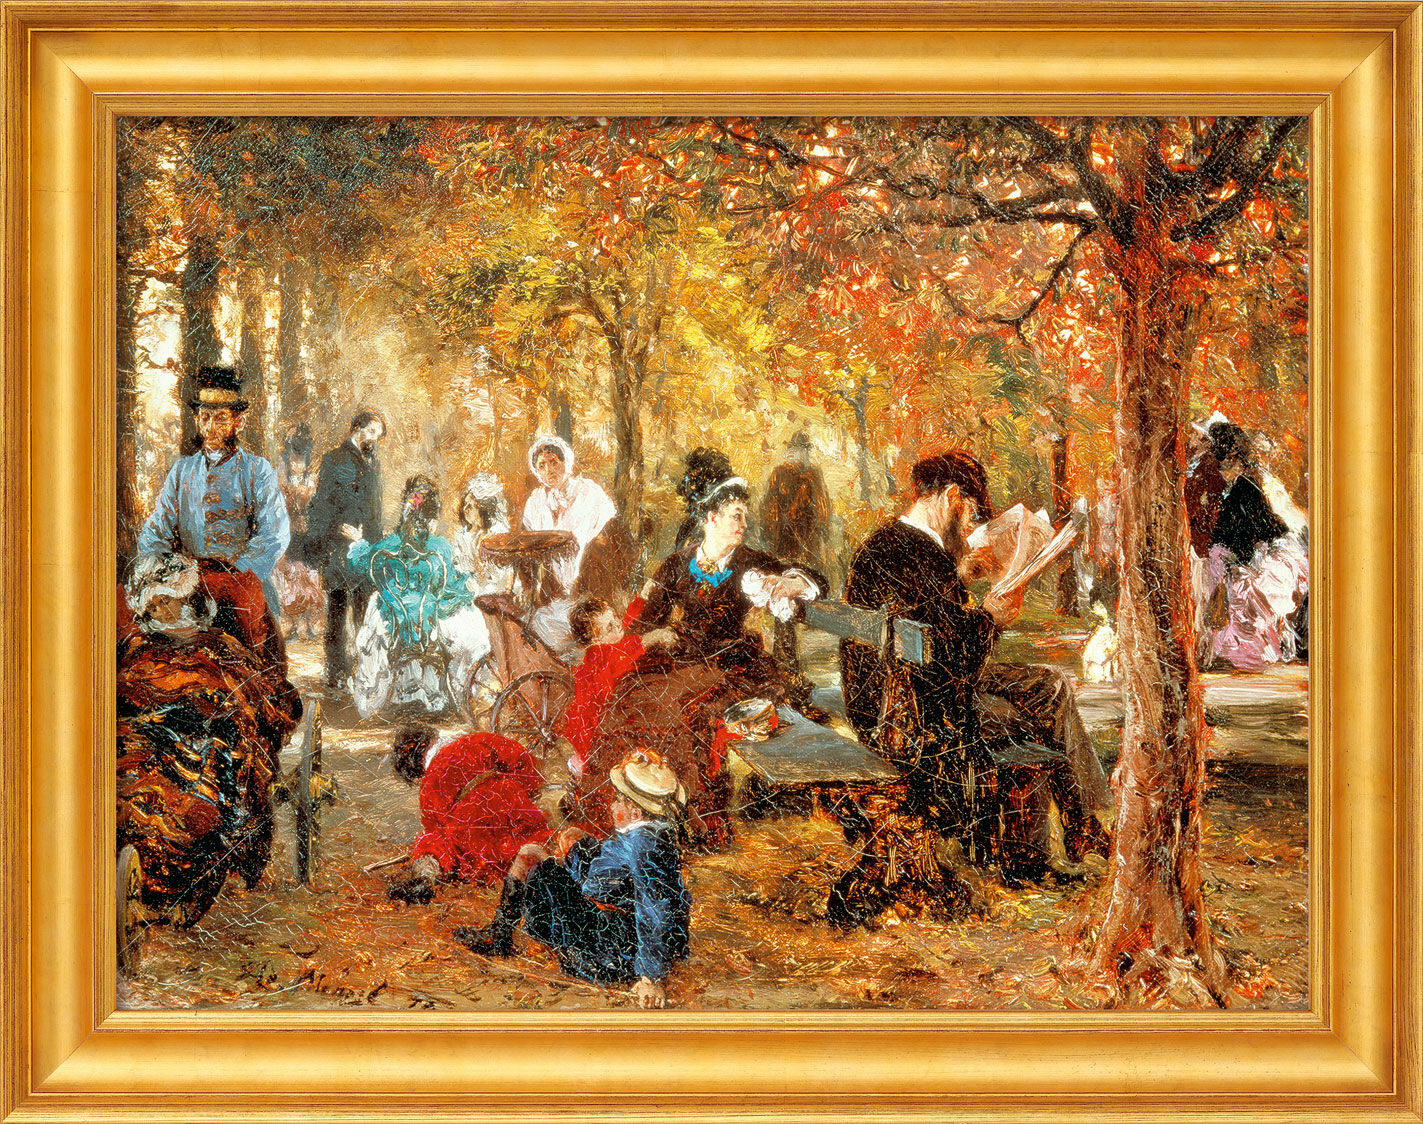 Picture "In the Jardin de Luxembourg" (1876), framed by Adolph von Menzel